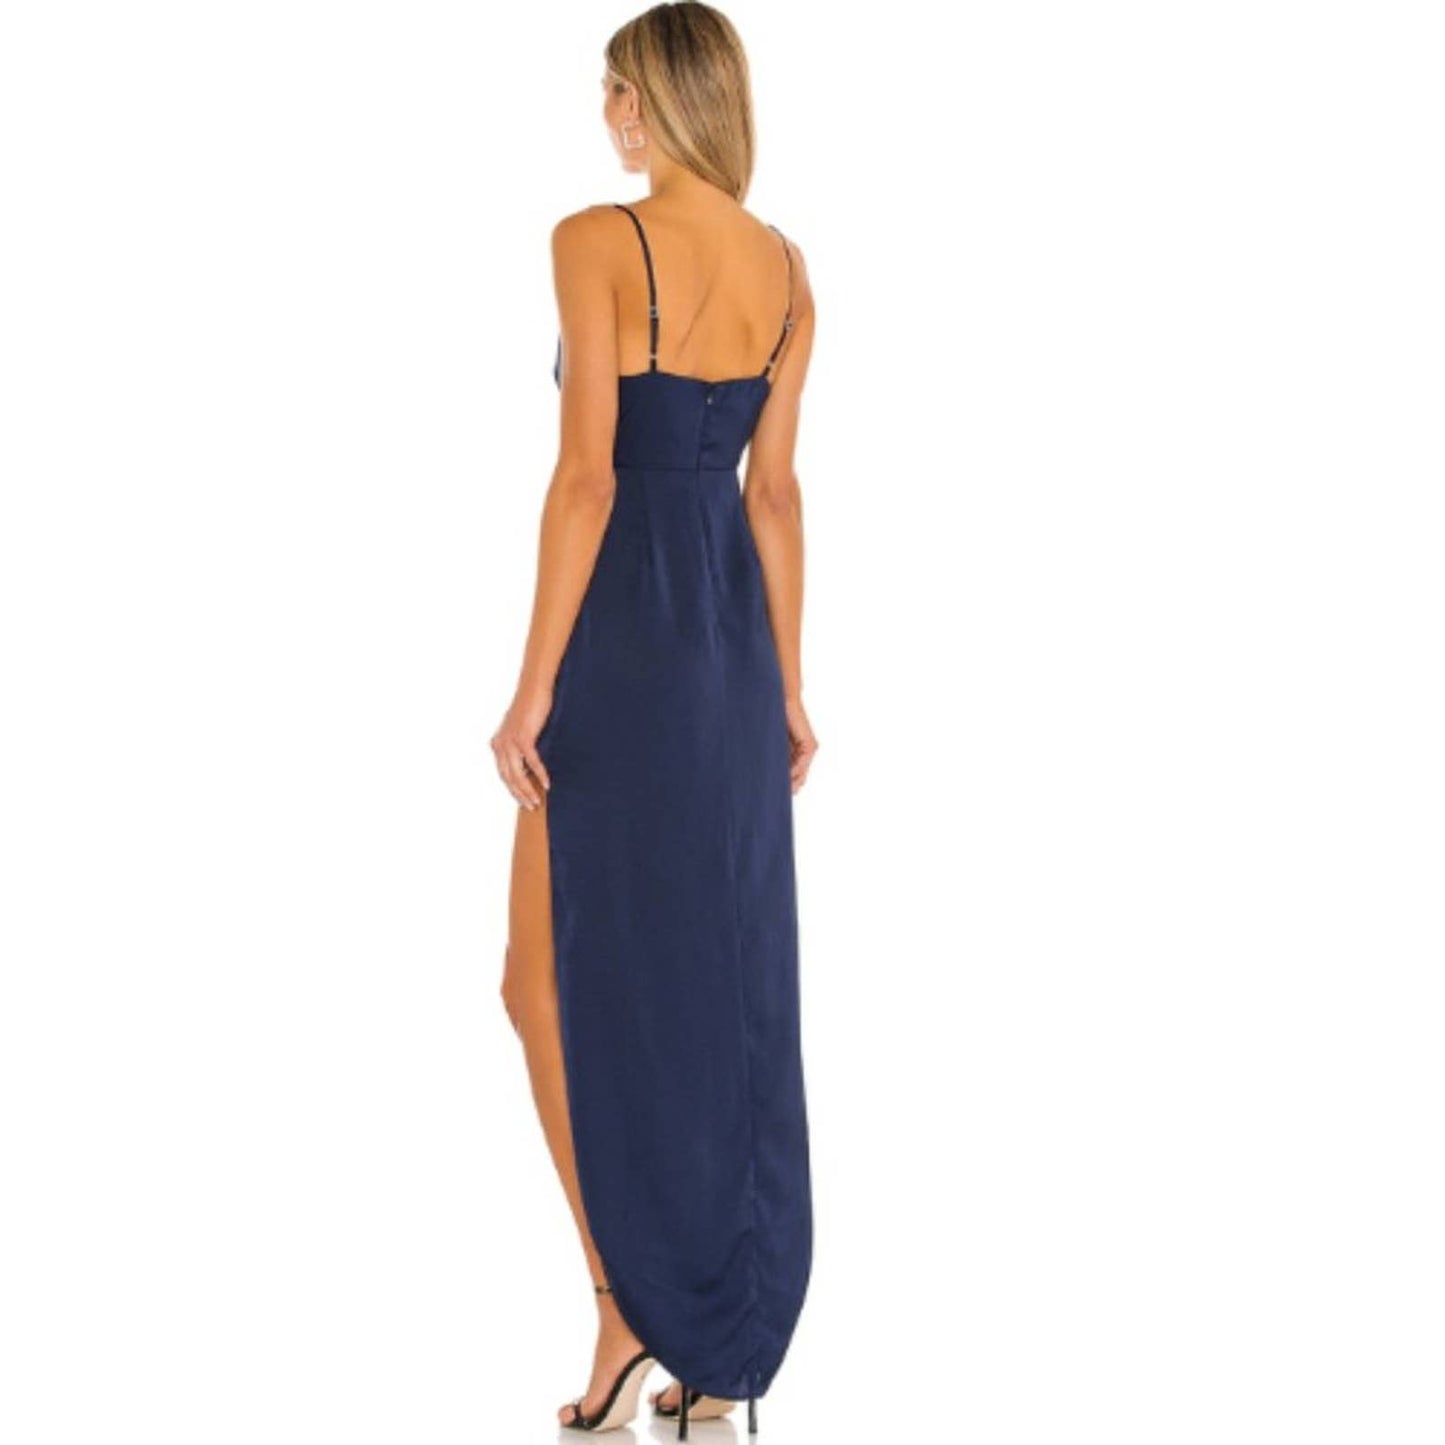 NBD Shelby Gown in Navy NWT Size Small